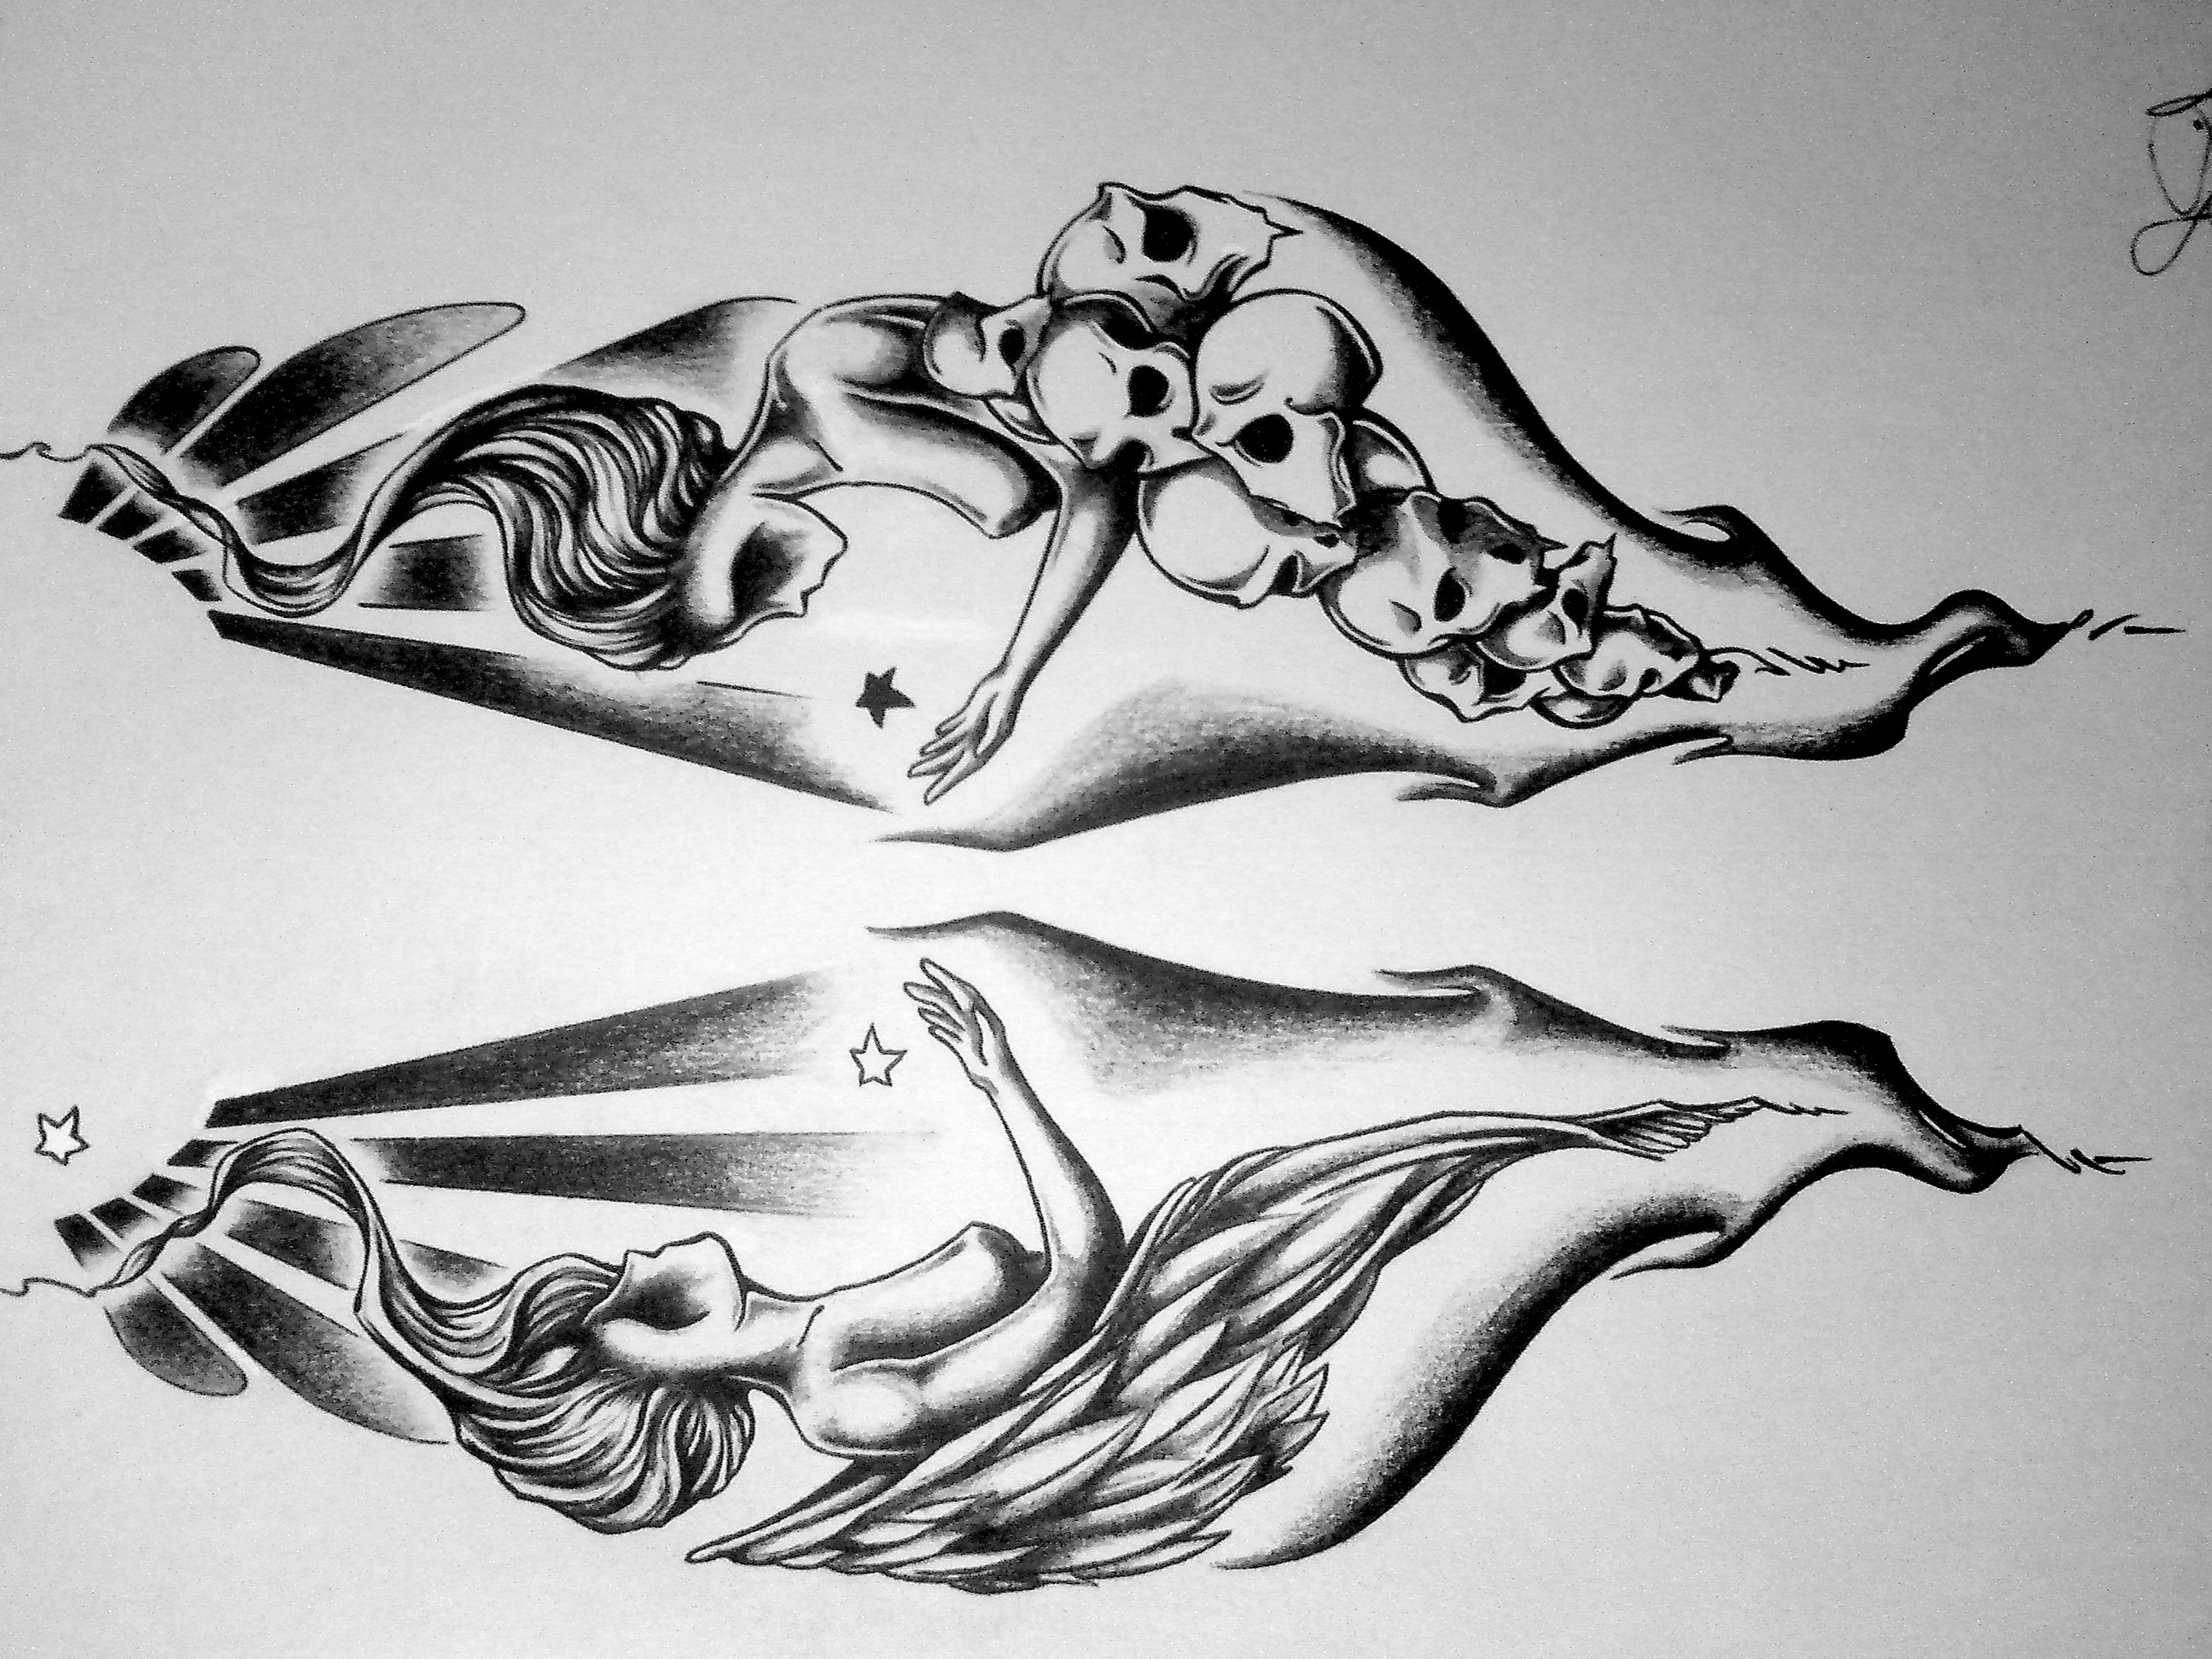 Sketch Forearm Tattoo Drawings For Men - tattoo design